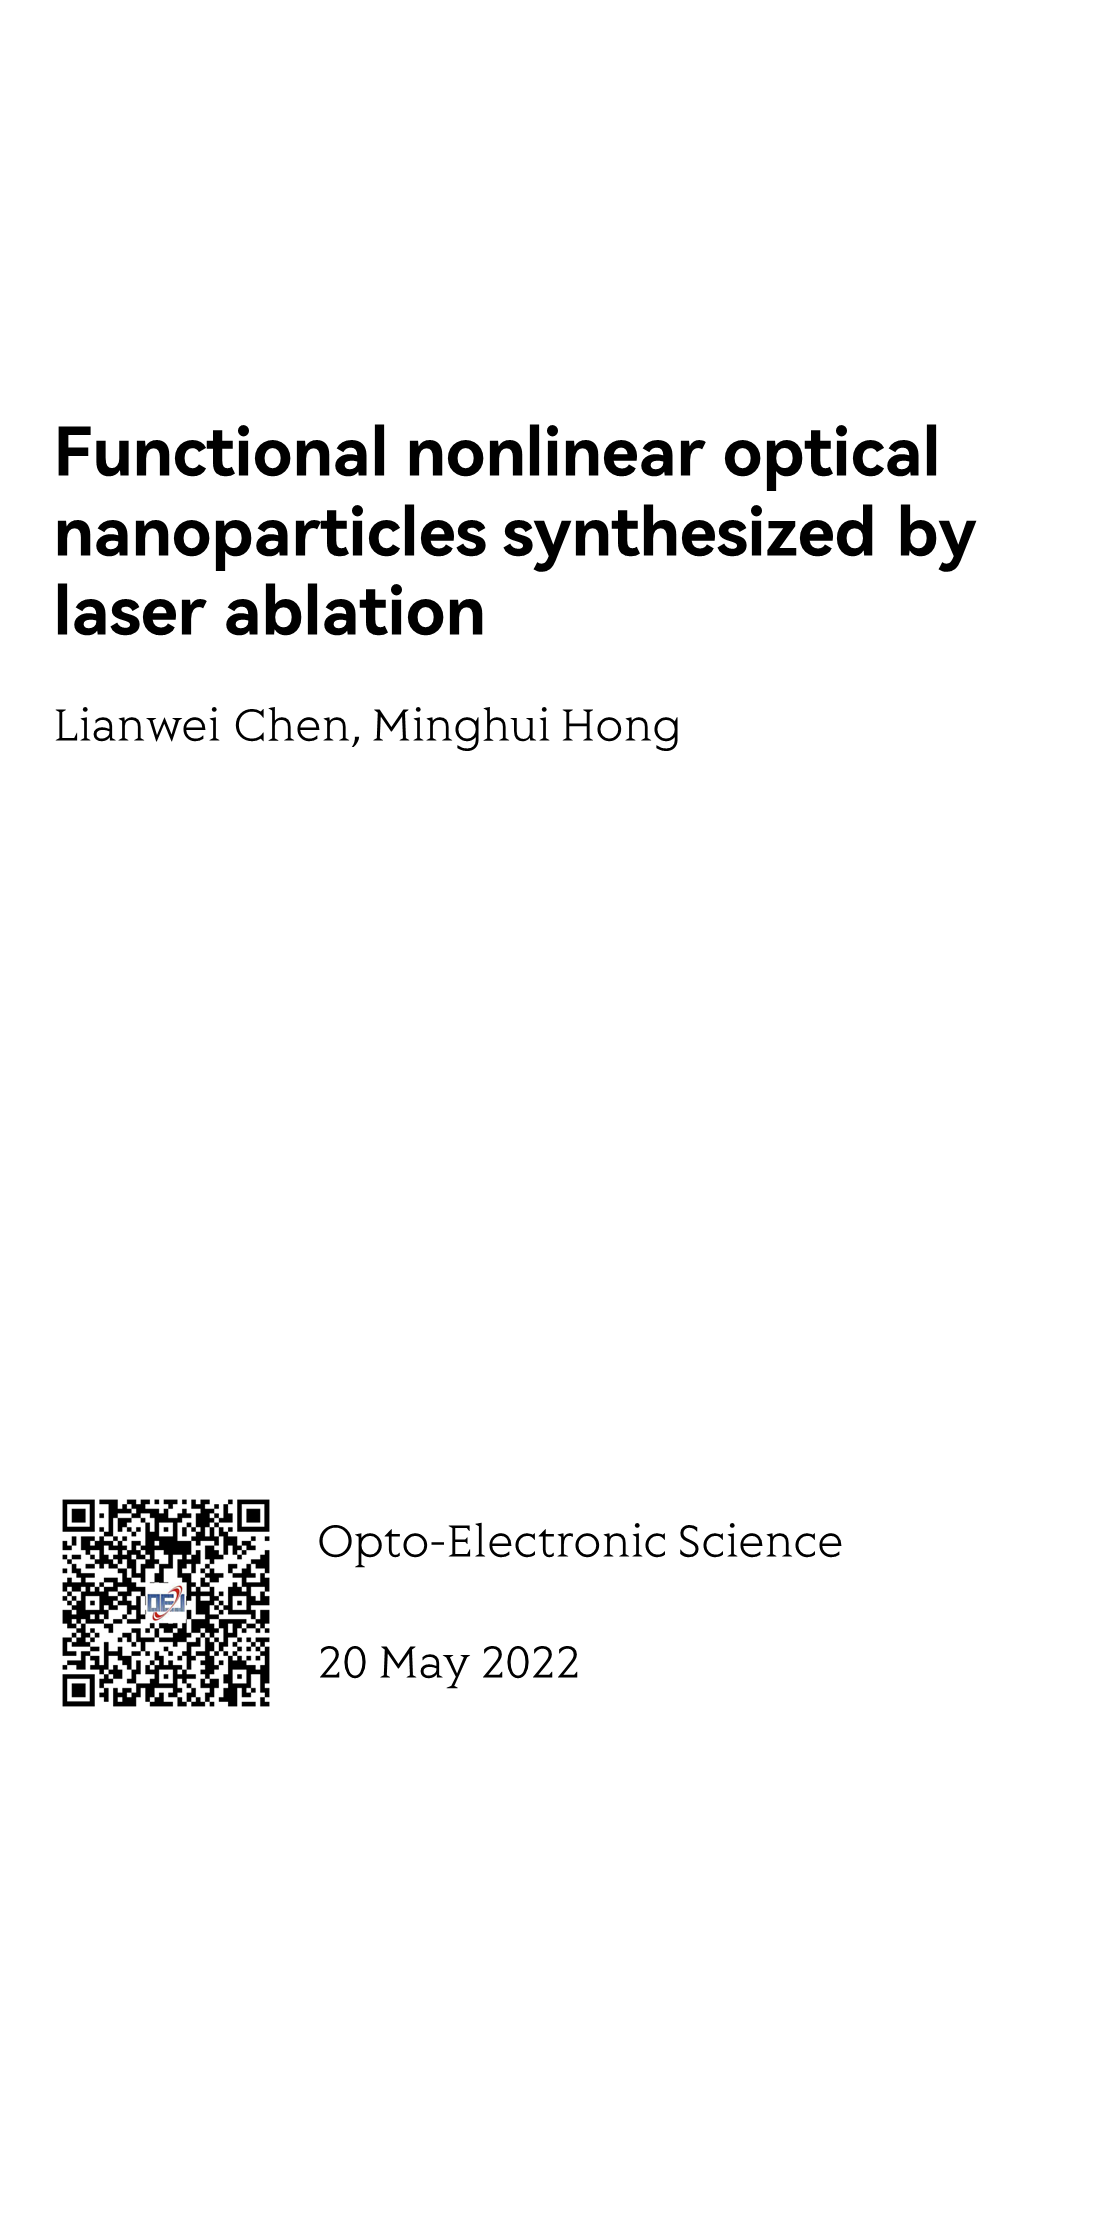 Functional nonlinear optical nanoparticles synthesized by laser ablation_1